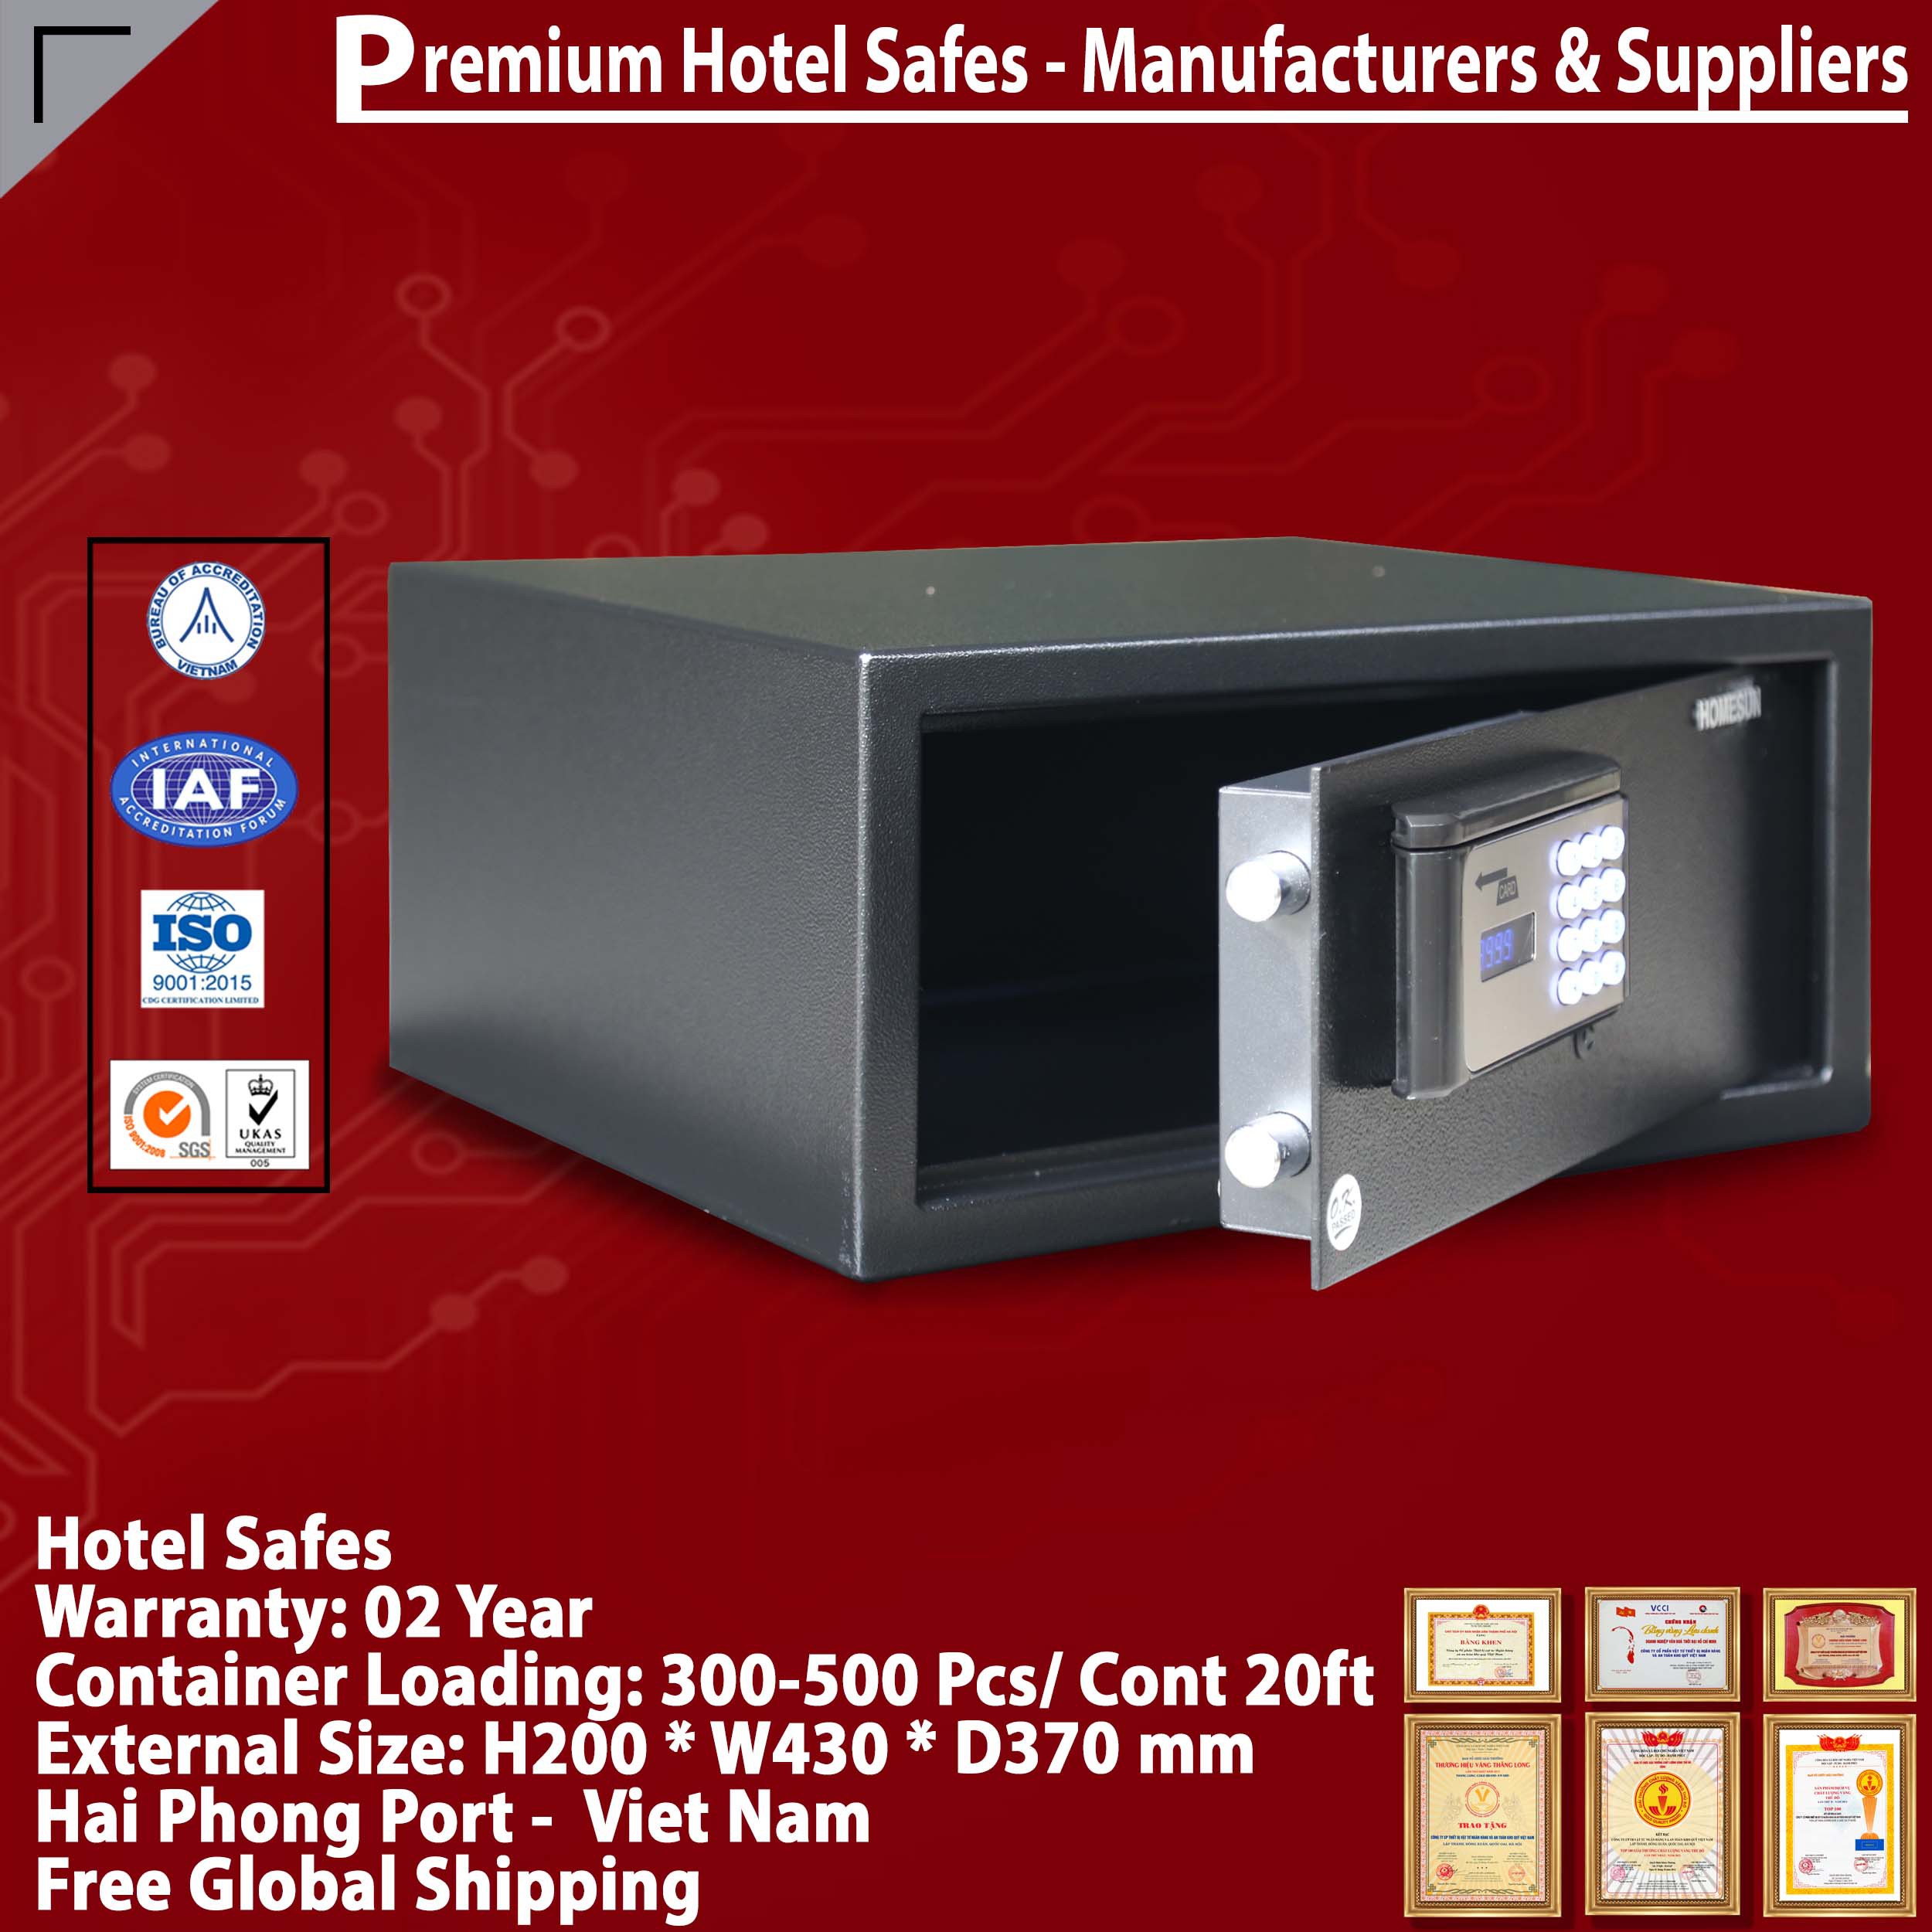 Best Sellers In Hotel Safes High Quality Price Ratio‎